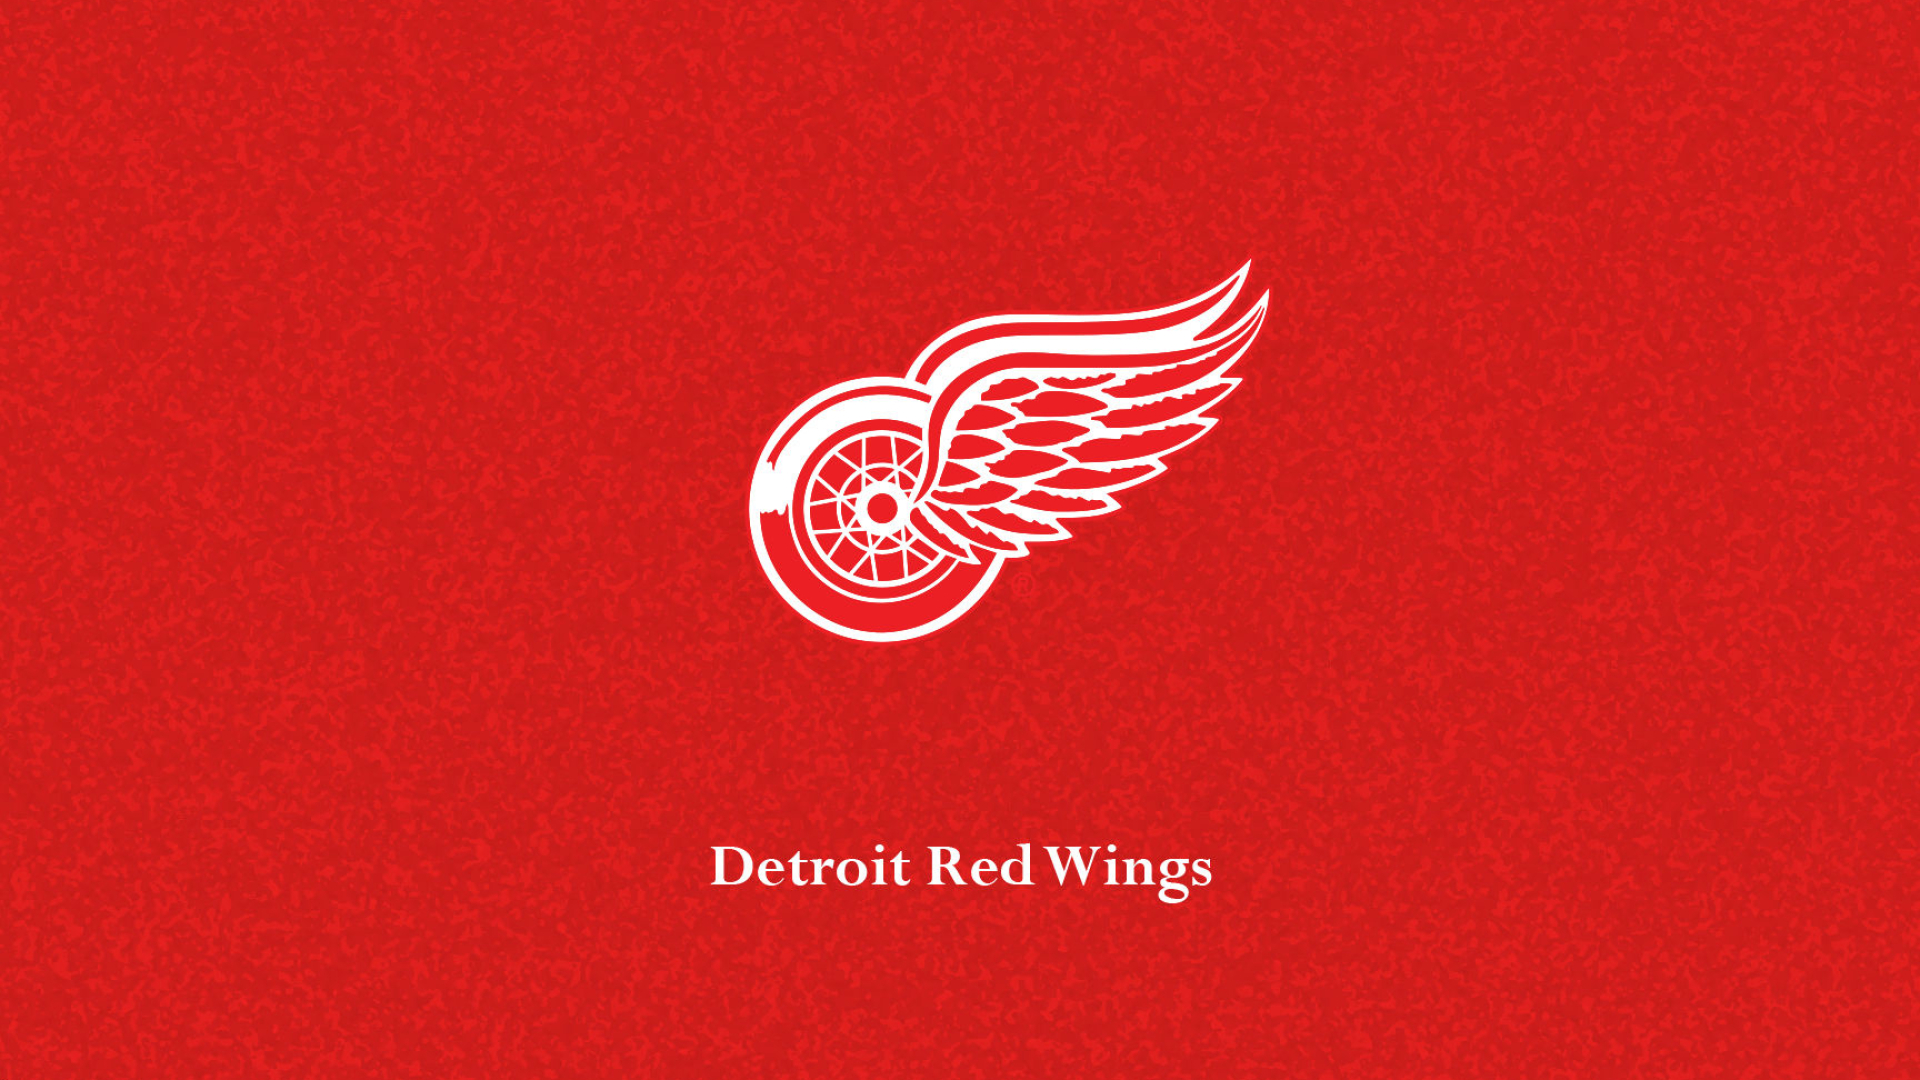 1920x1080 Free download detroit red wings wallpaper 22 hockey teams hd backgrounds [] for your Desktop, Mobile \u0026 Tablet | Explore 73+ Detroit Red Wings Wallpapers | Detroit Lions Wallpaper, Red Wings Mobile